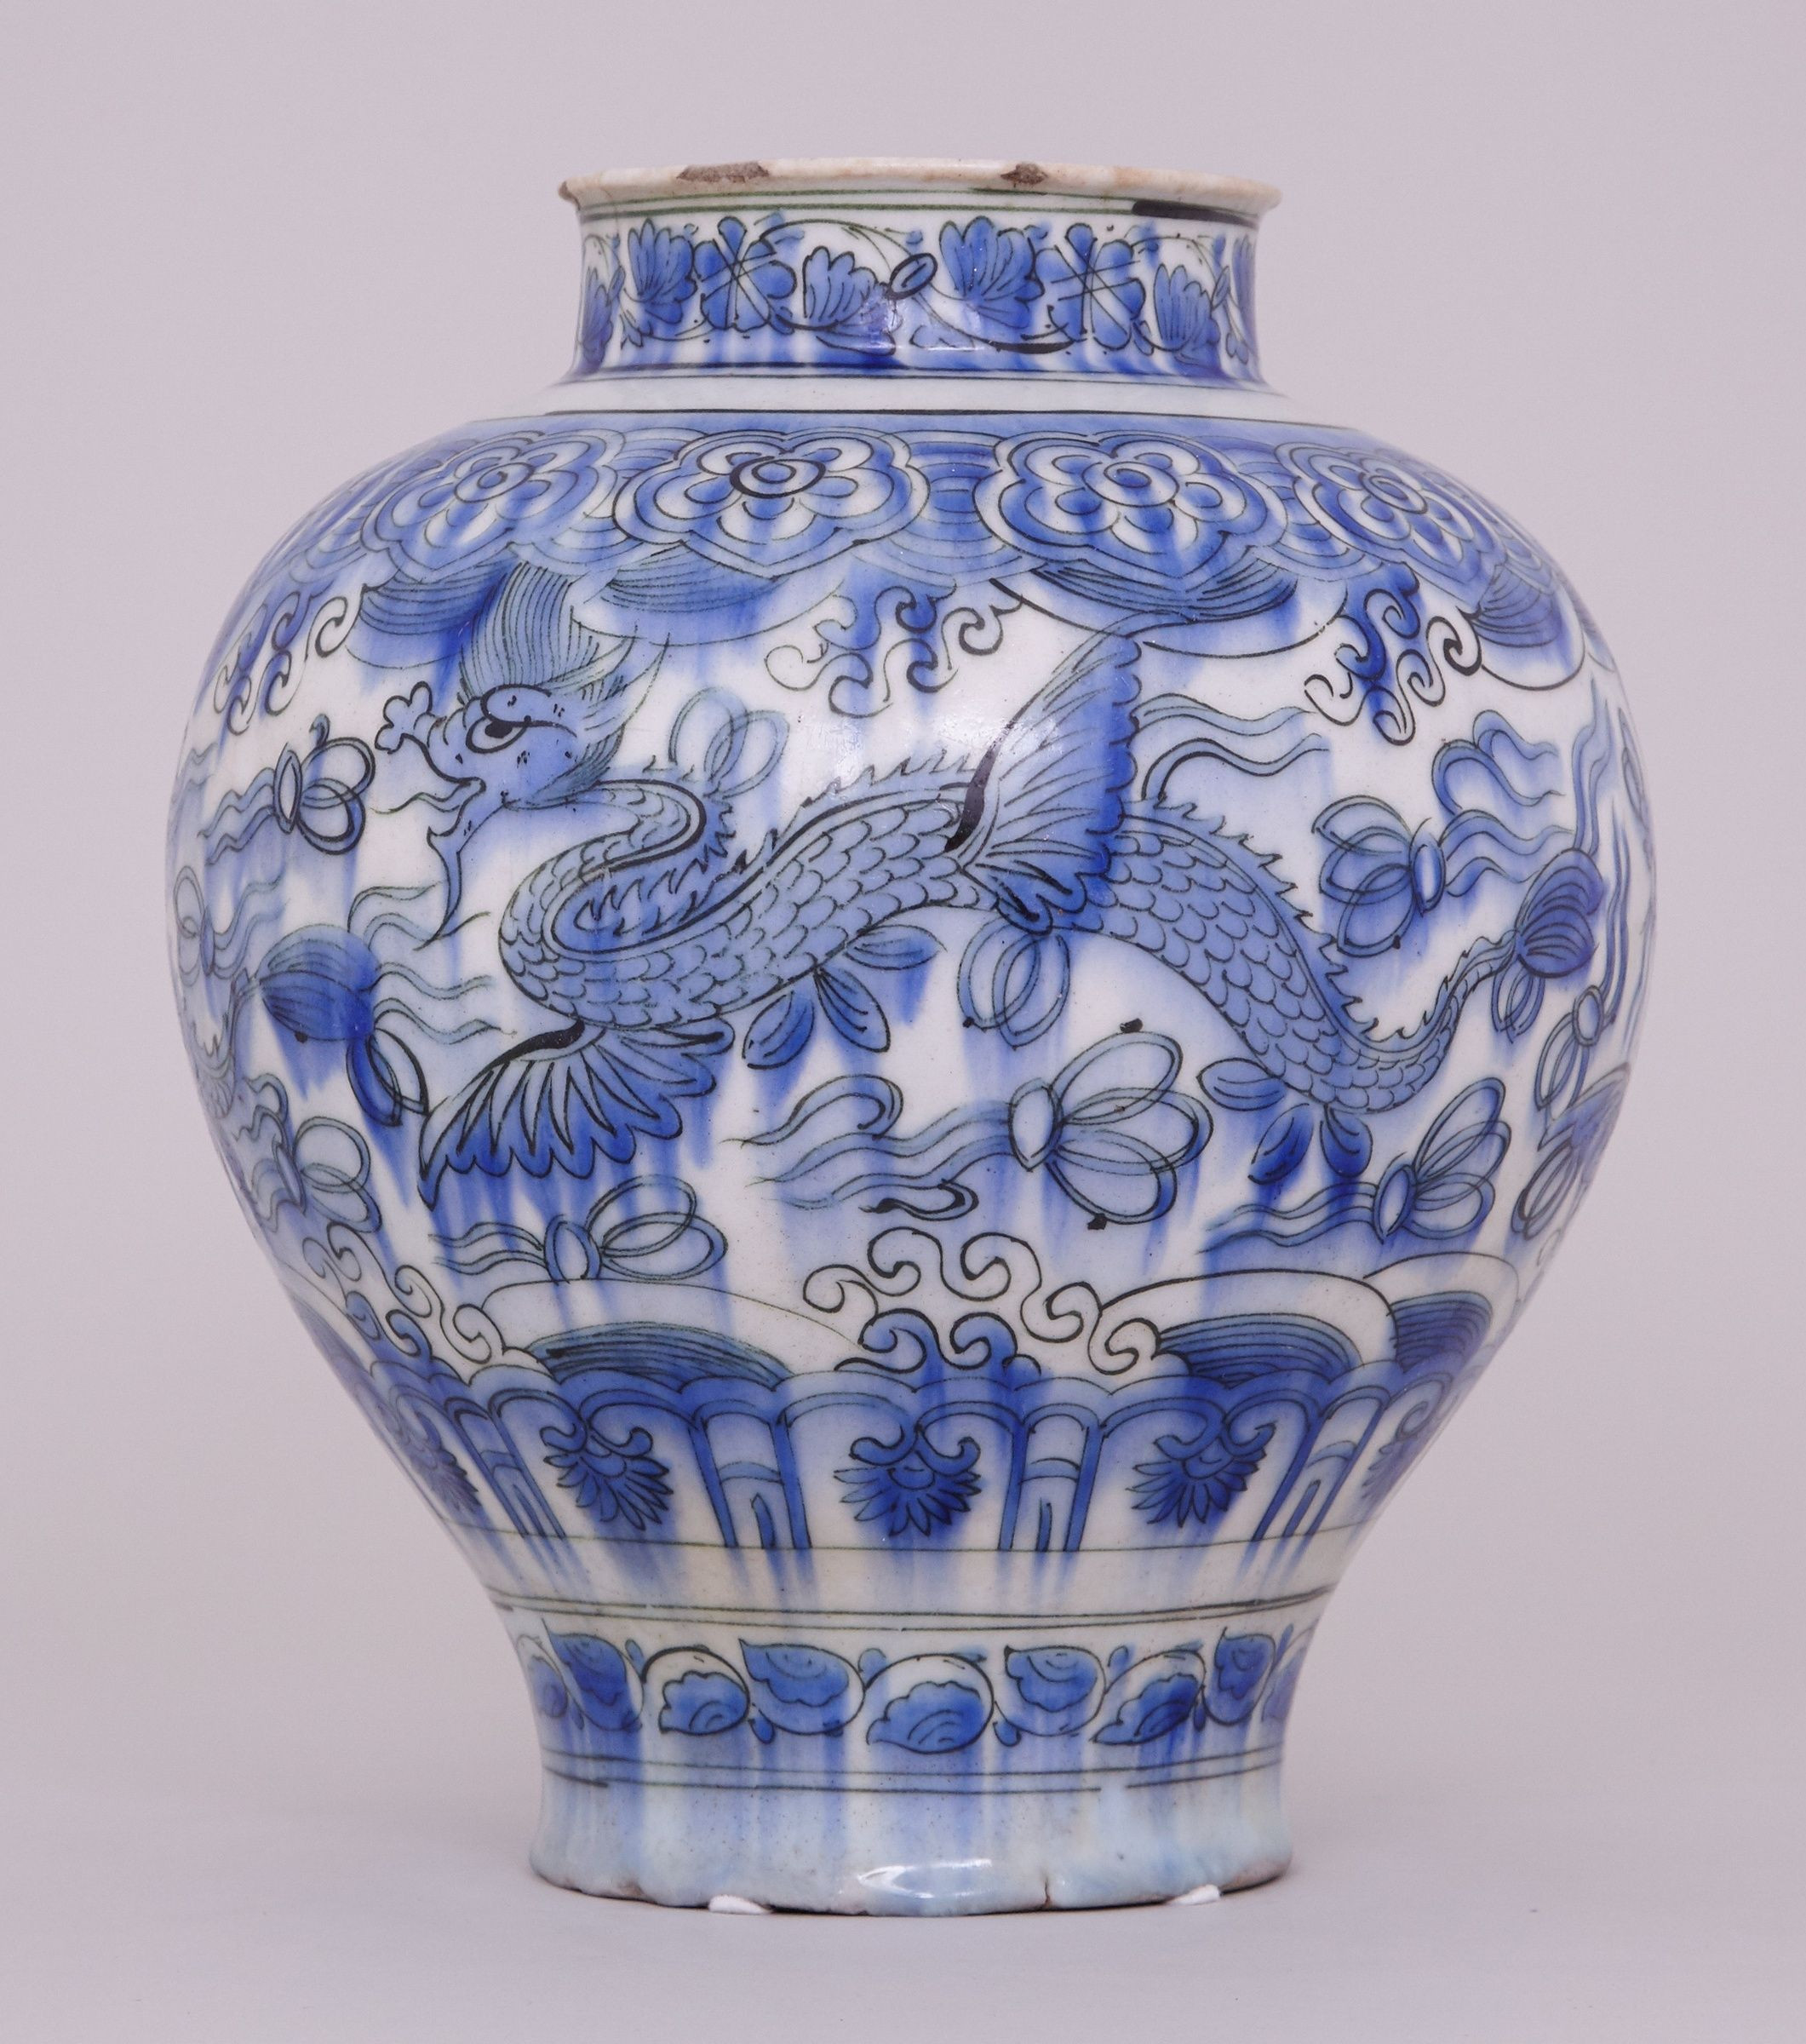 20 Fabulous Chinese Porcelain Vases for Sale 2022 free download chinese porcelain vases for sale of white pottery vase elegant a blue and white persian safavid jar 17th intended for white pottery vase elegant a blue and white persian safavid jar 17th cen